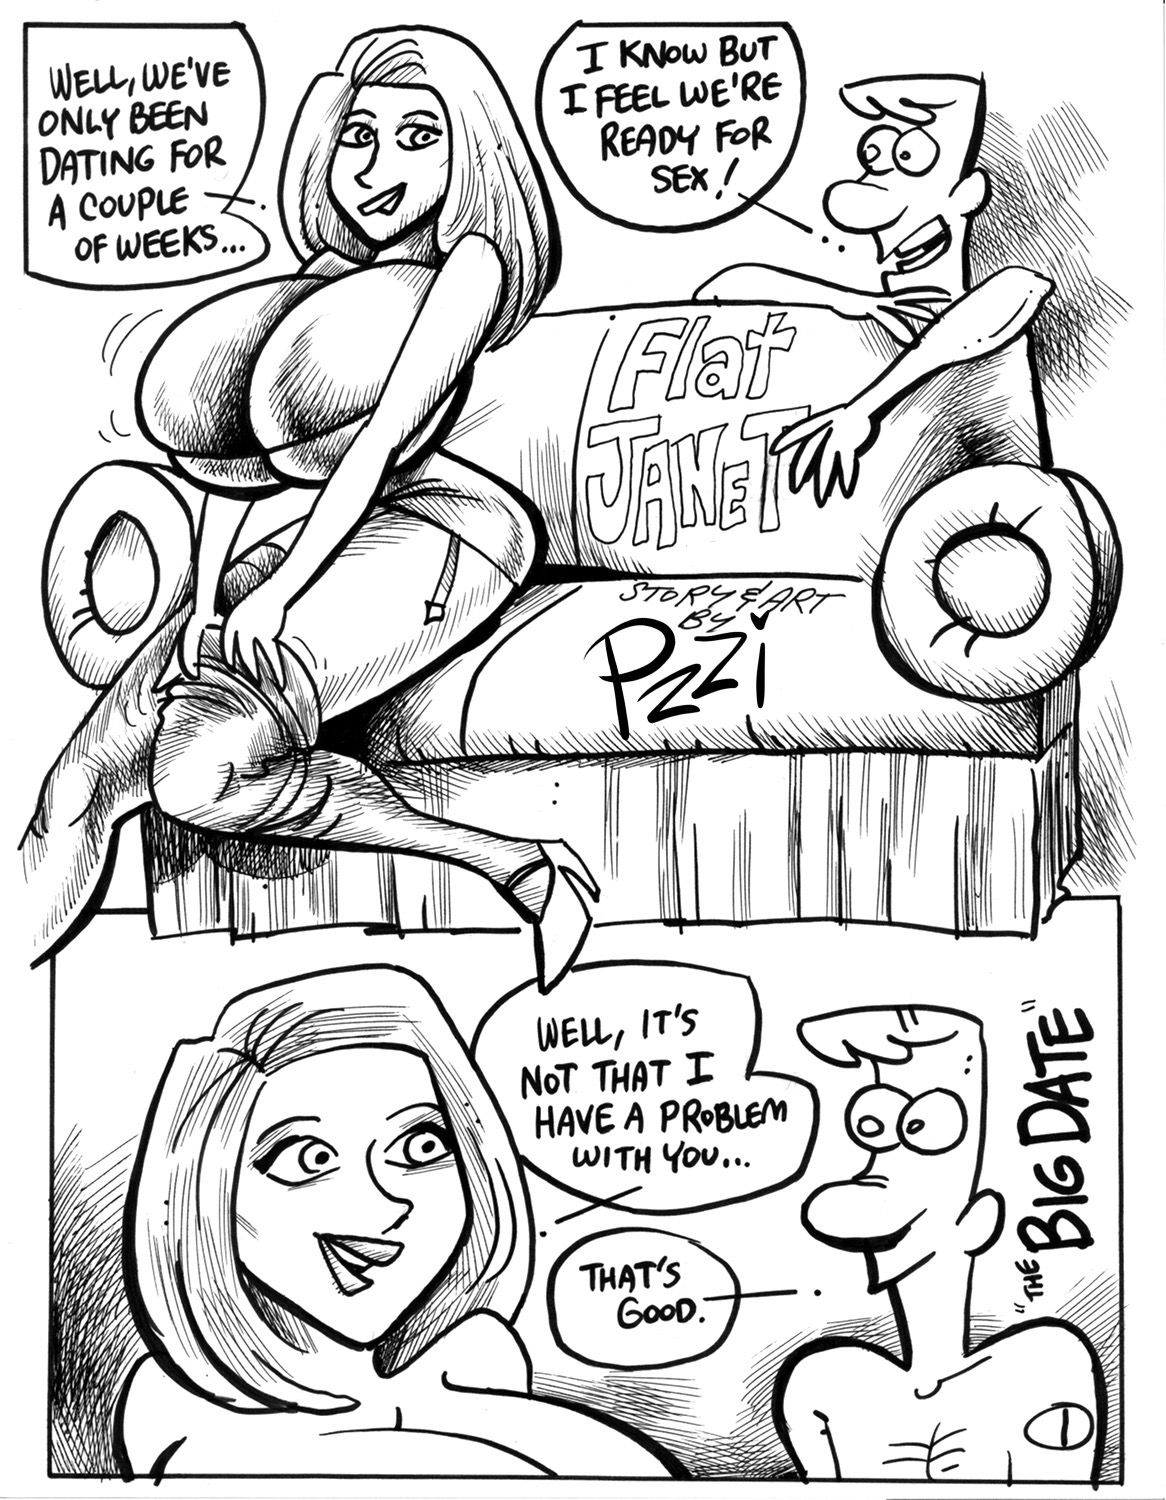 [pzzi] “Flat Janet” - stand alone comic 18 pages (Pen & ink) 2